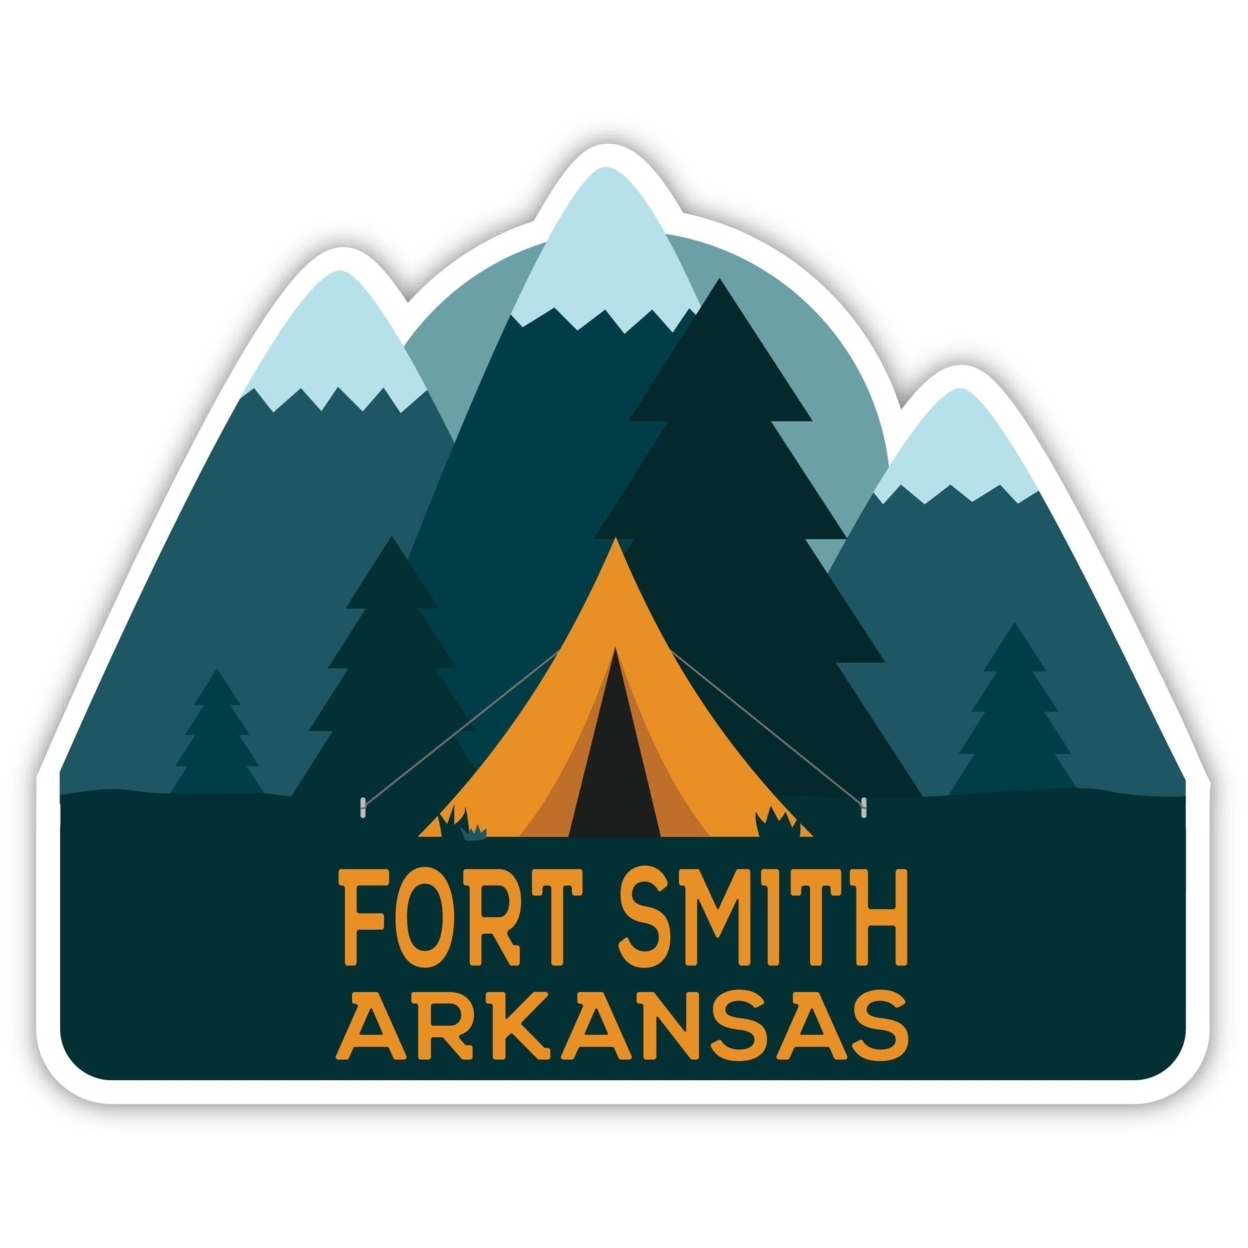 Fort Smith Arkansas Souvenir Decorative Stickers (Choose Theme And Size) - 4-Pack, 8-Inch, Tent